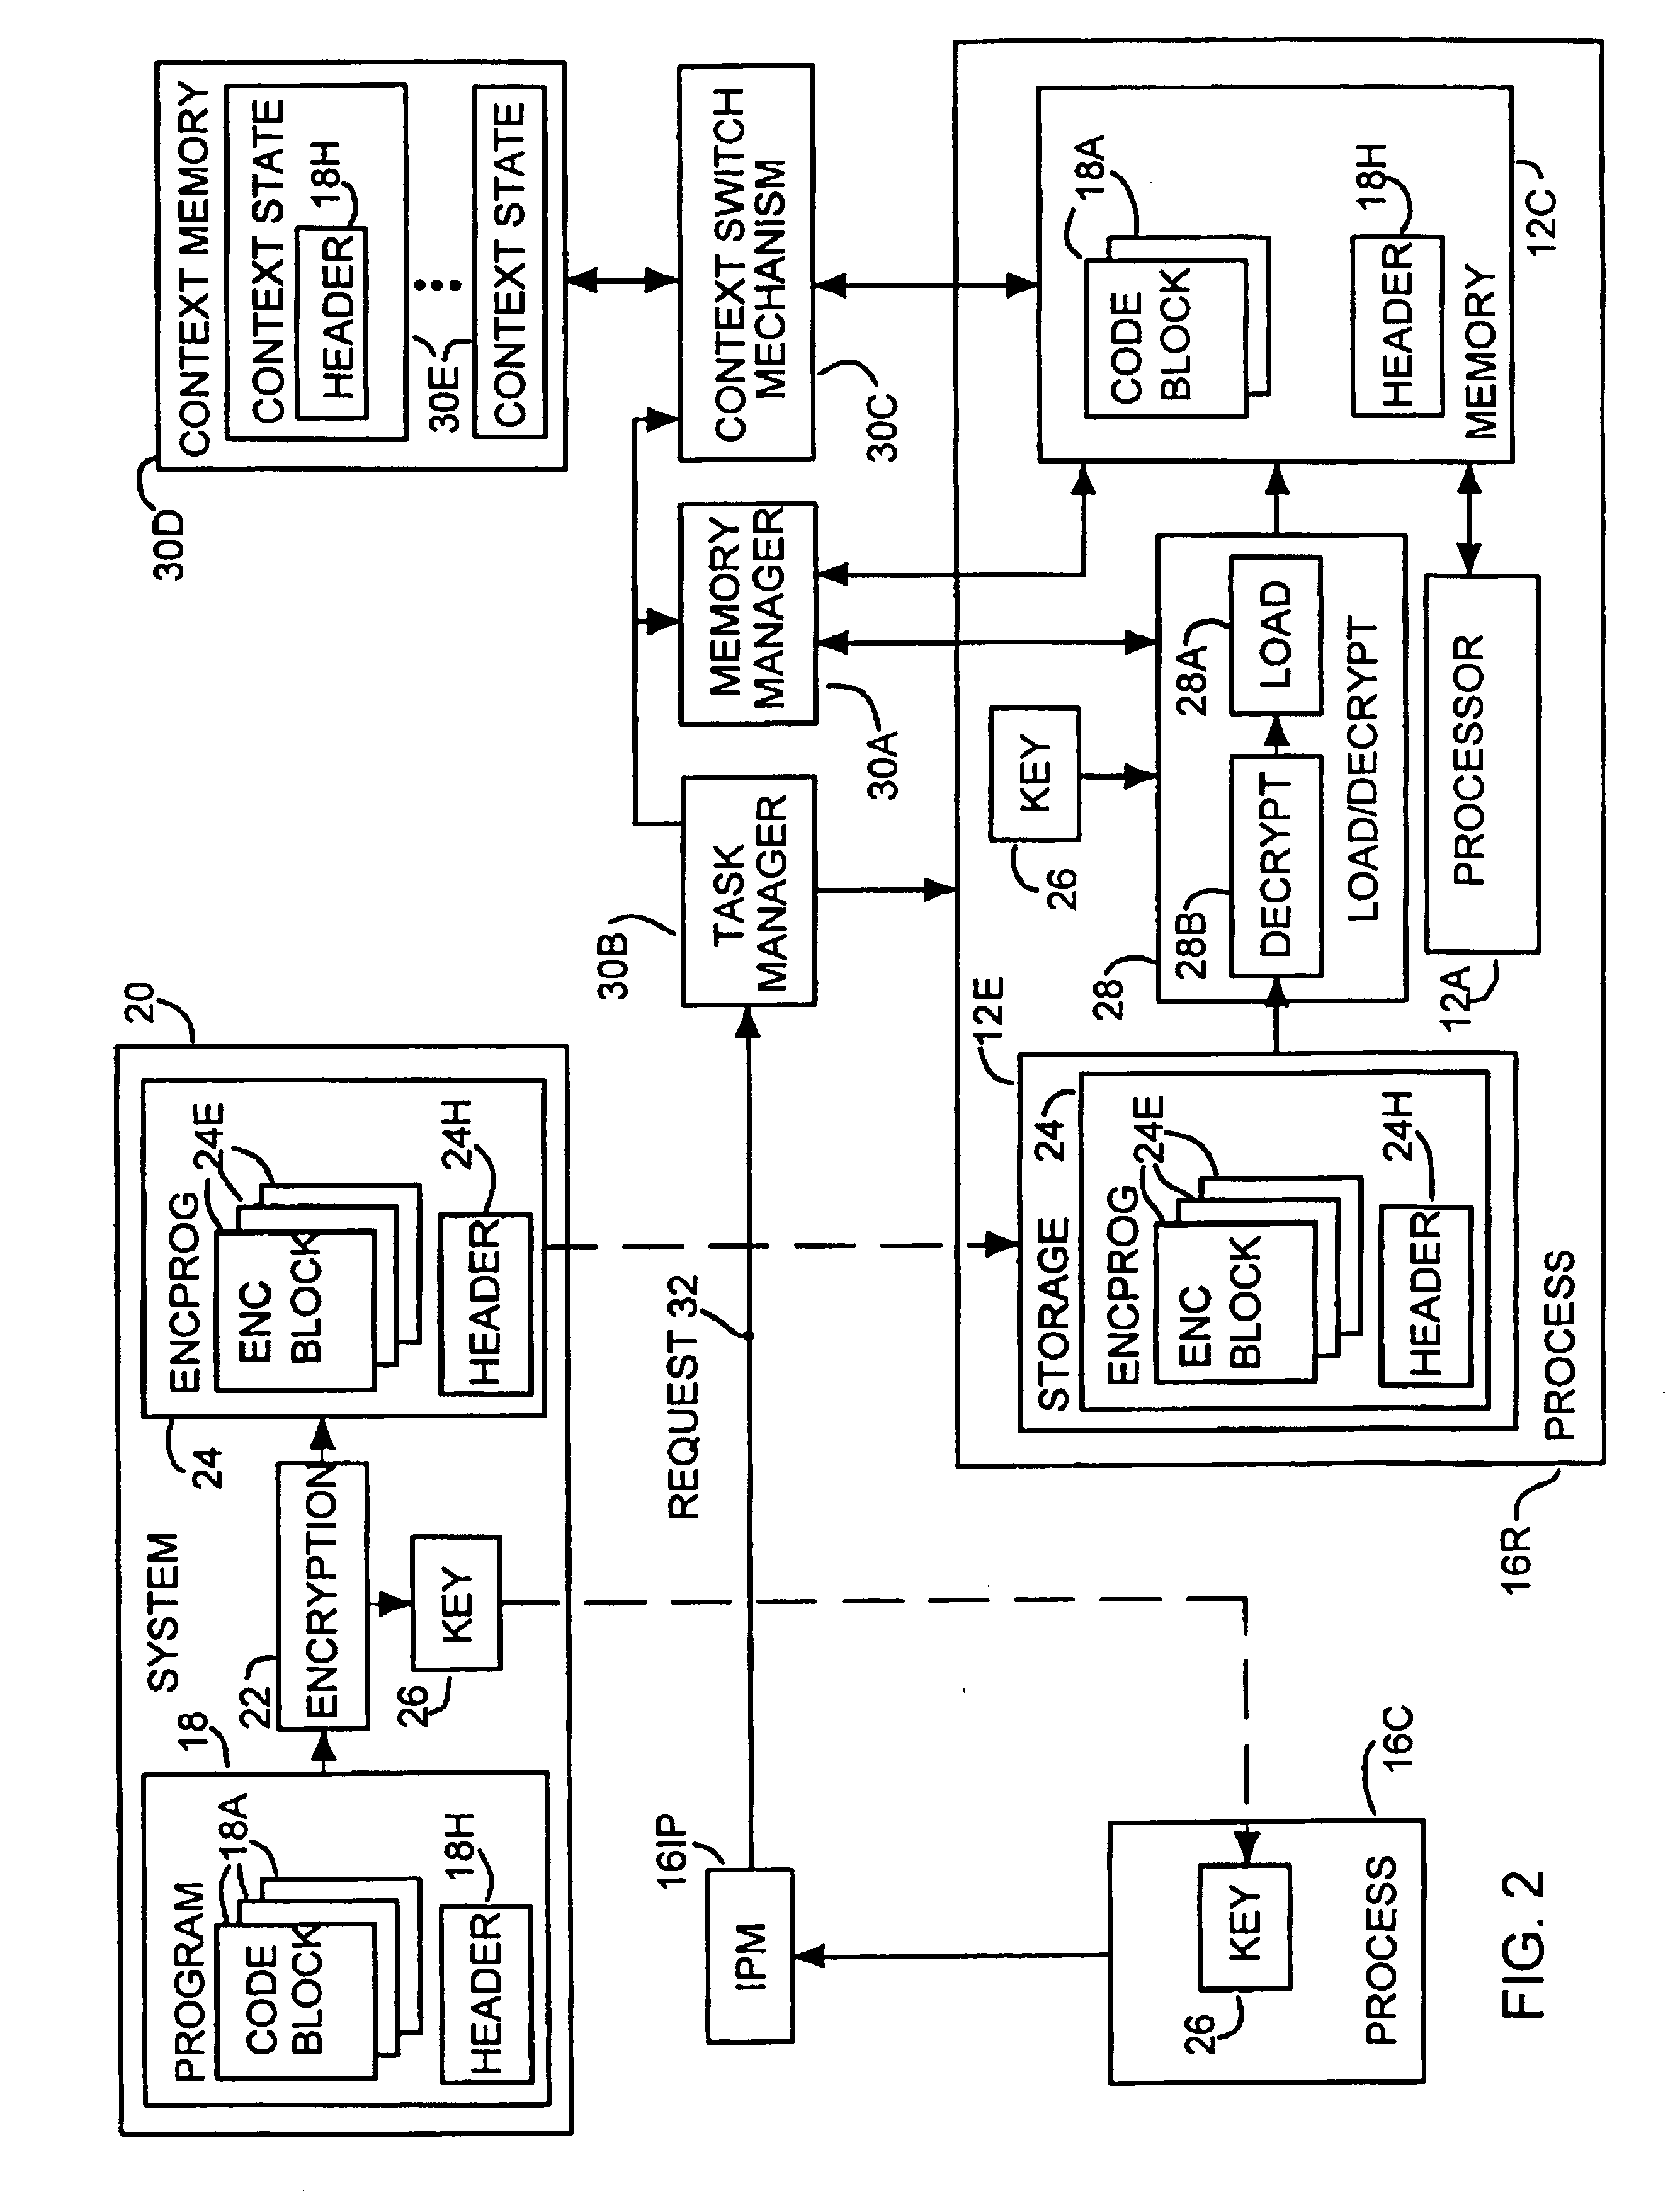 Secure storage and execution of processor control programs by encryption and a program loader/decryption mechanism